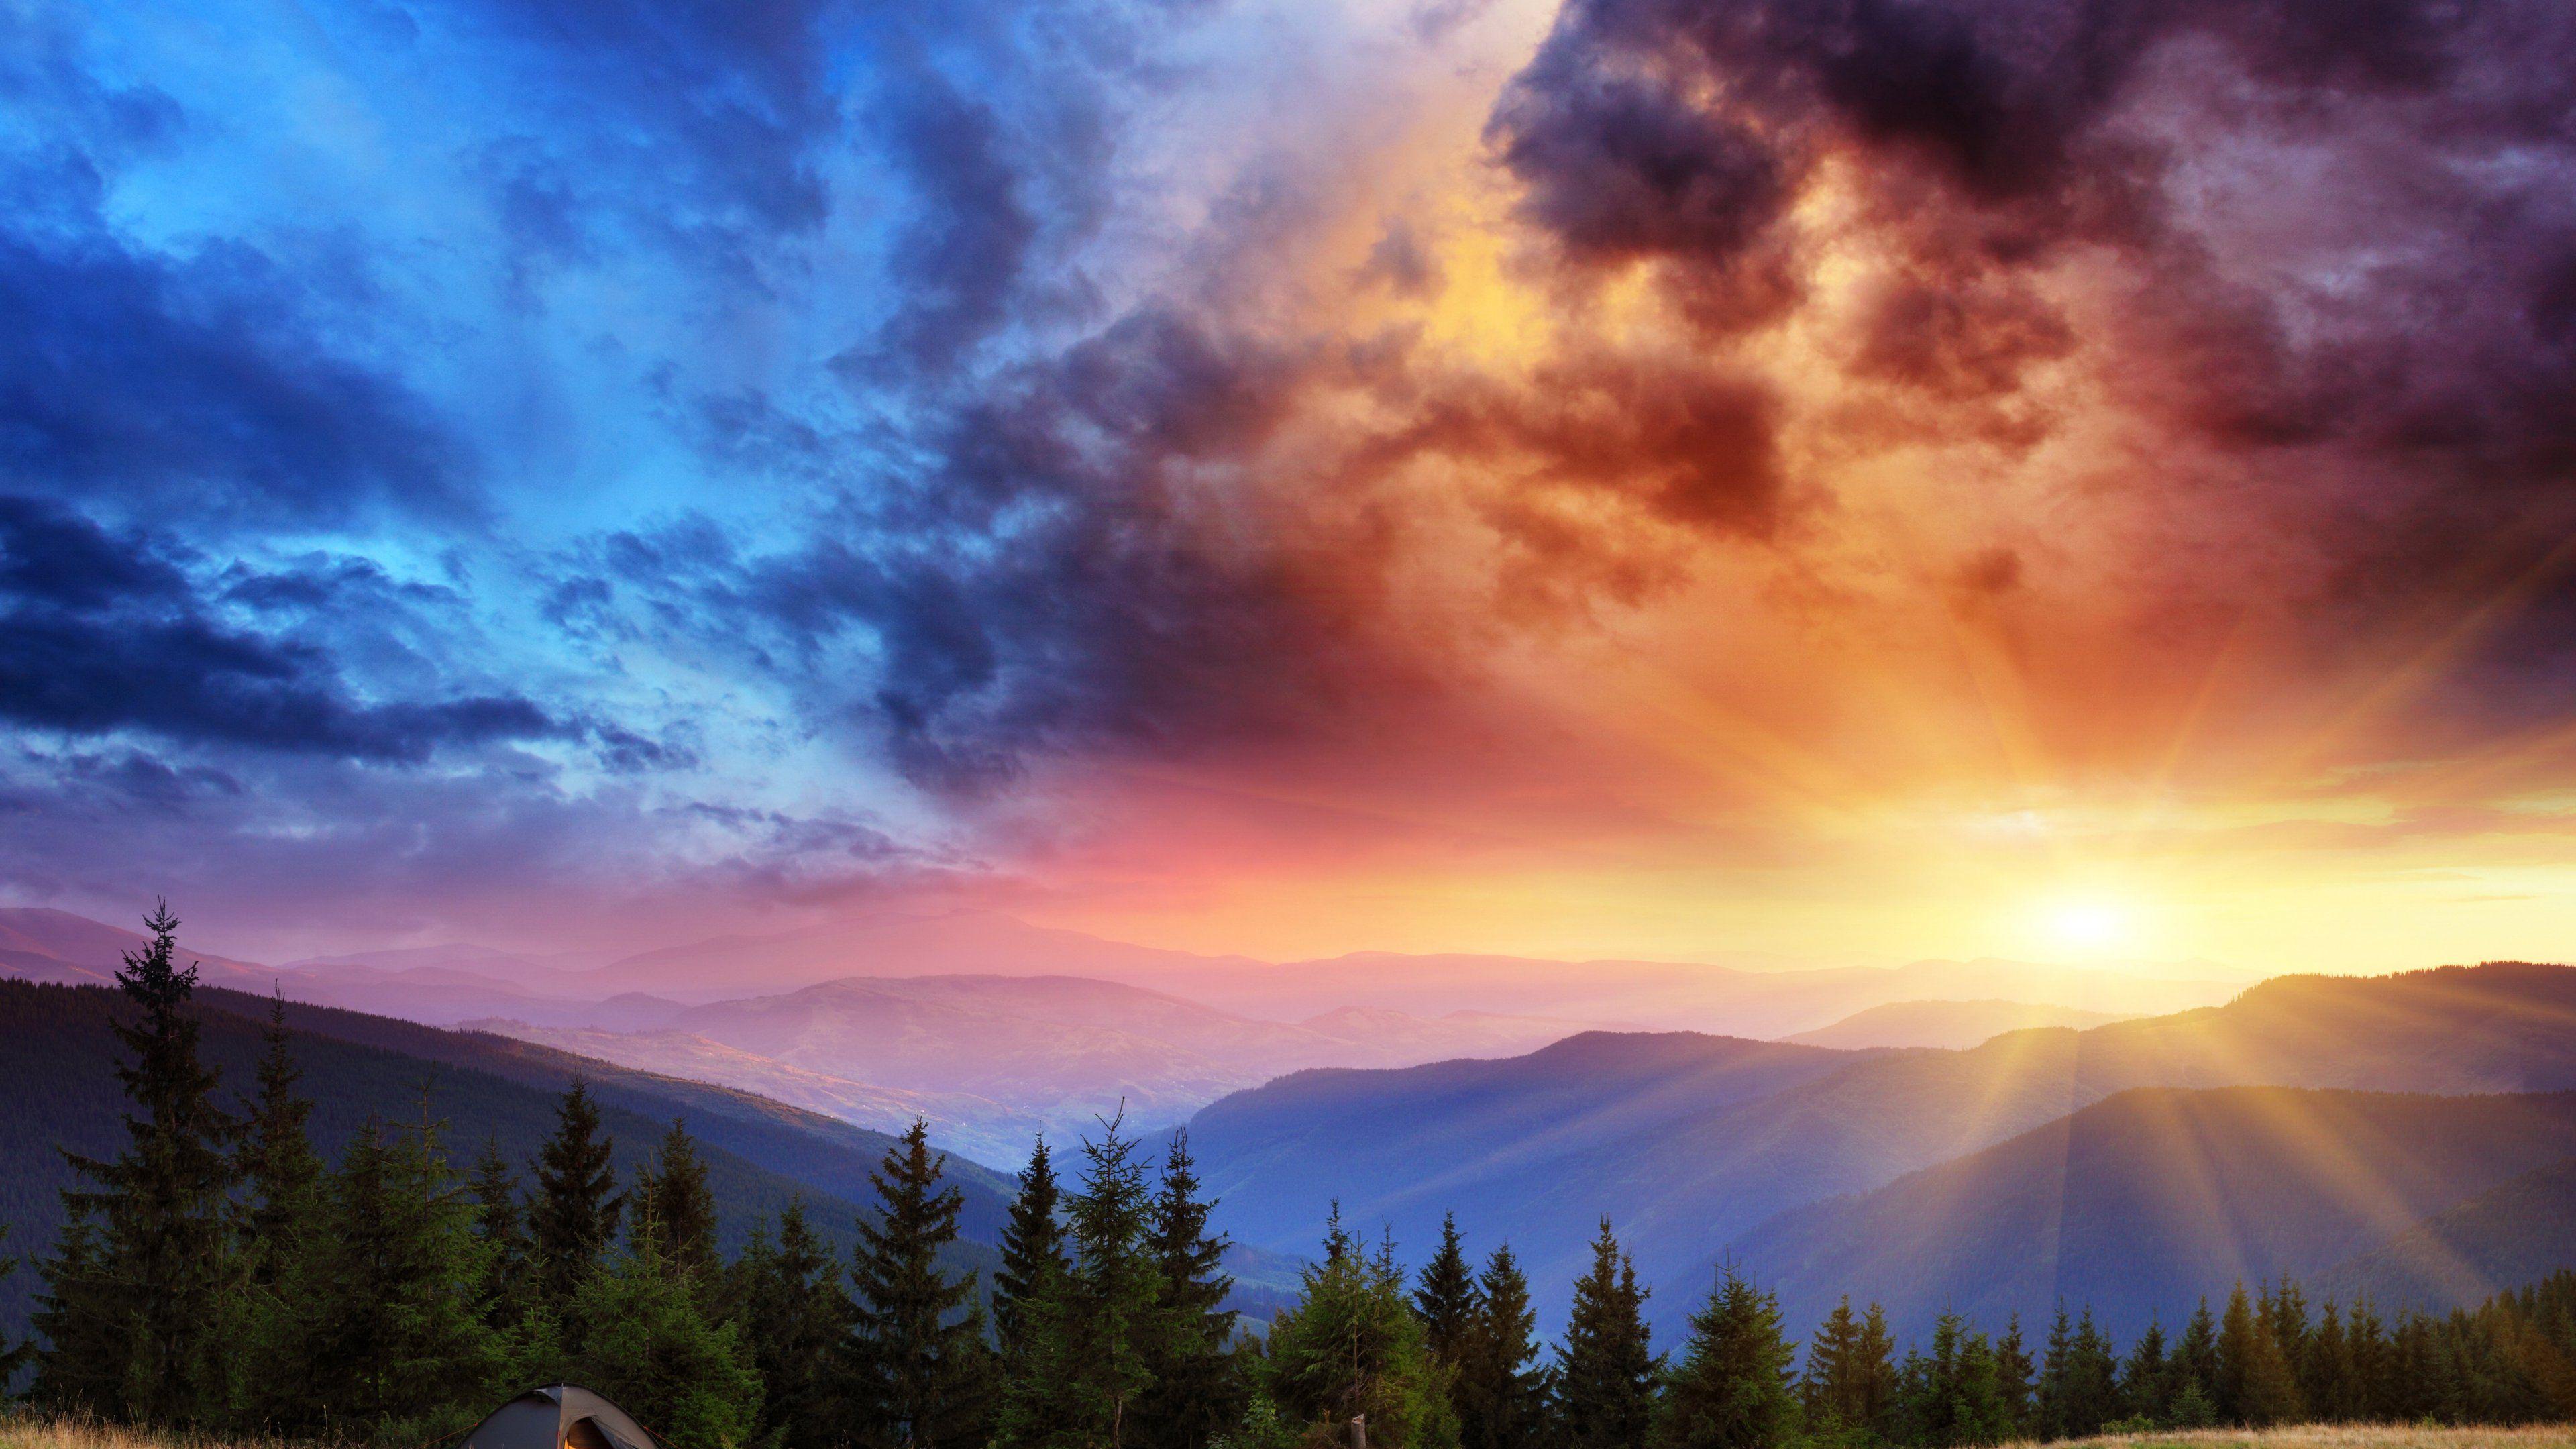 Mountain Sunrise Ultra Hd Wallpapers - Wallpaper Cave